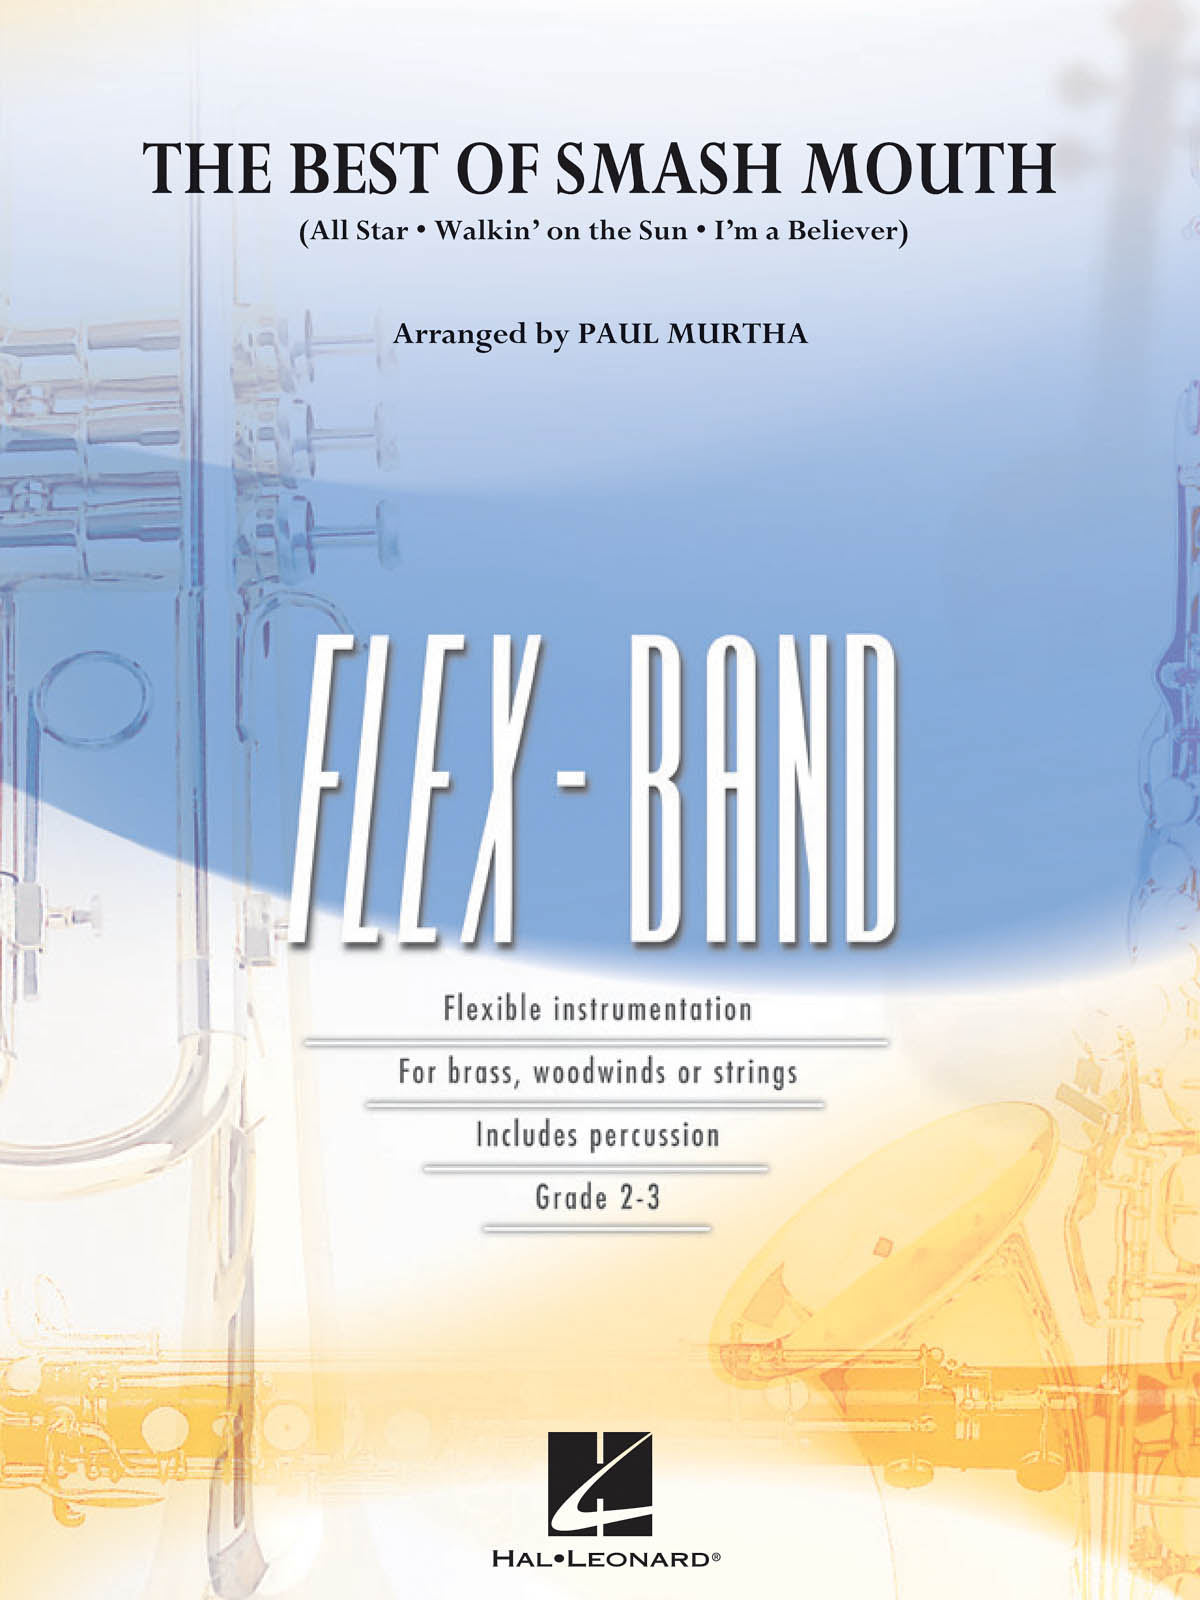 The Best of Smash Mouth: Flexible Band: Score